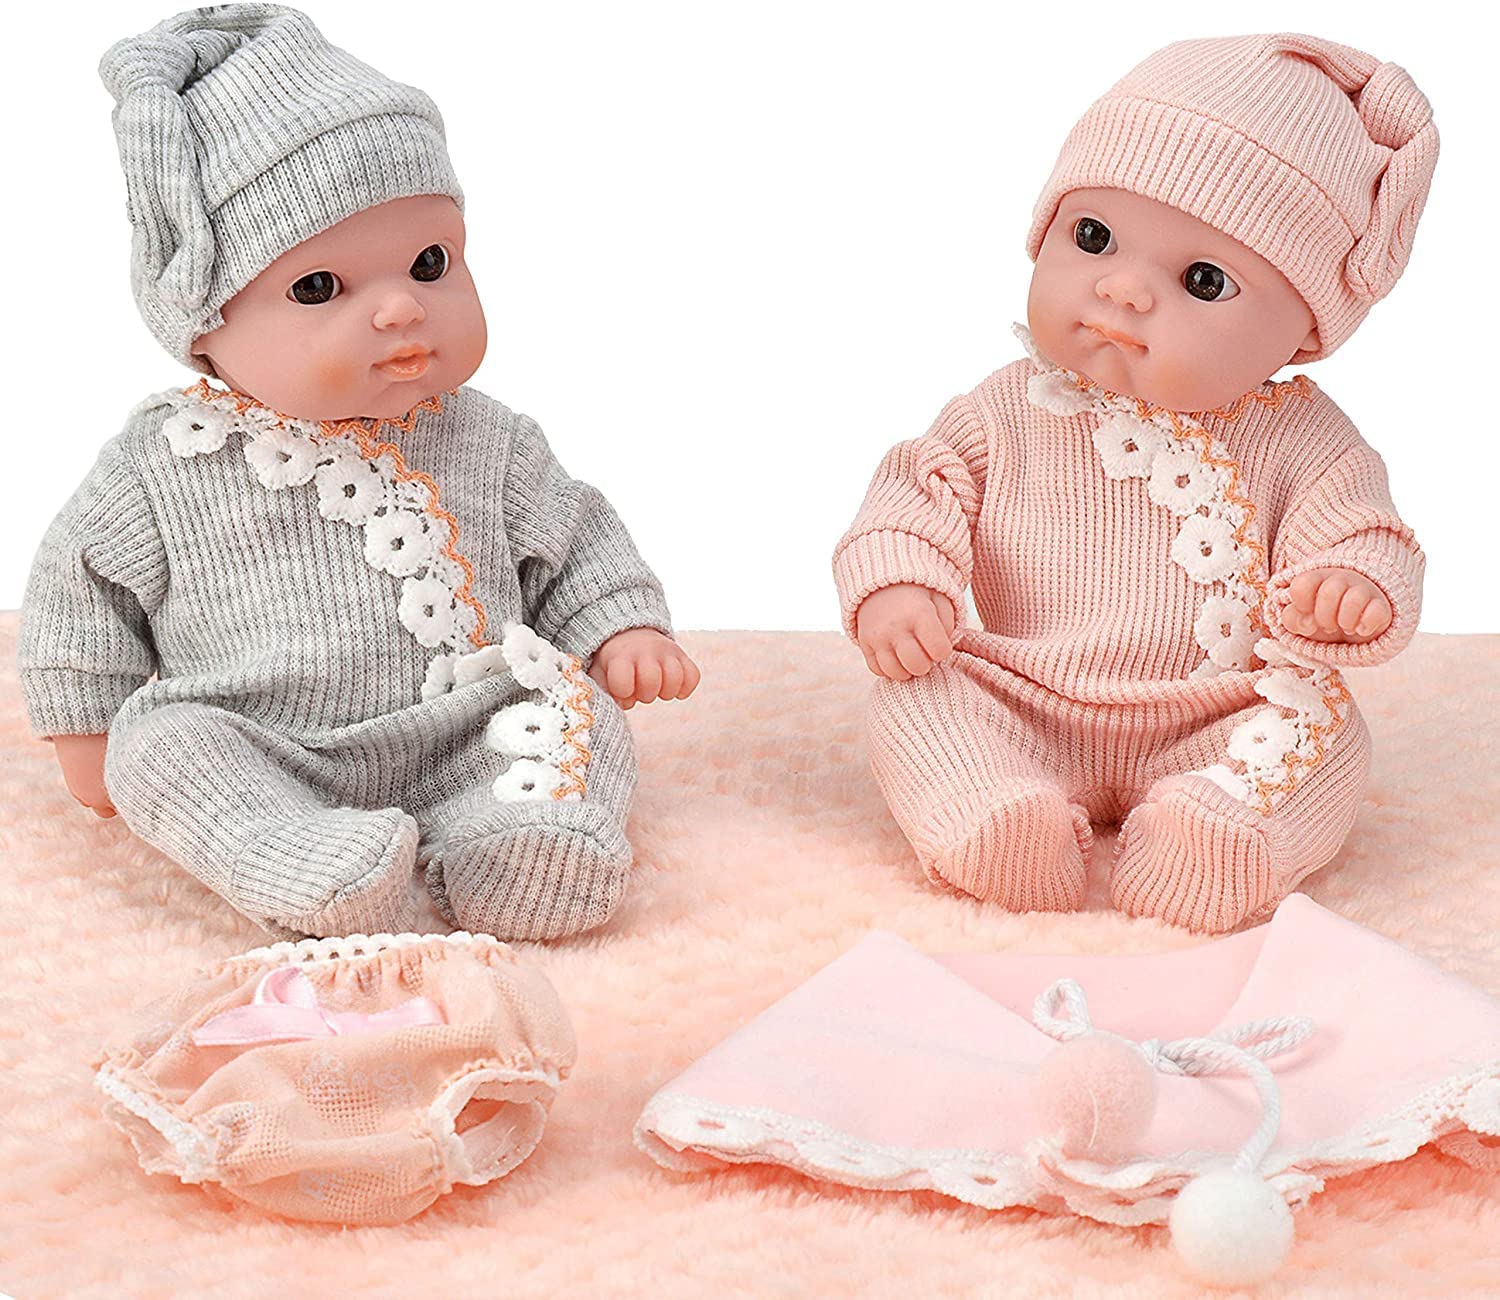 Mommy & Me Soft Twin Baby Doll For 3-Year-Old Girls, 8-Inch